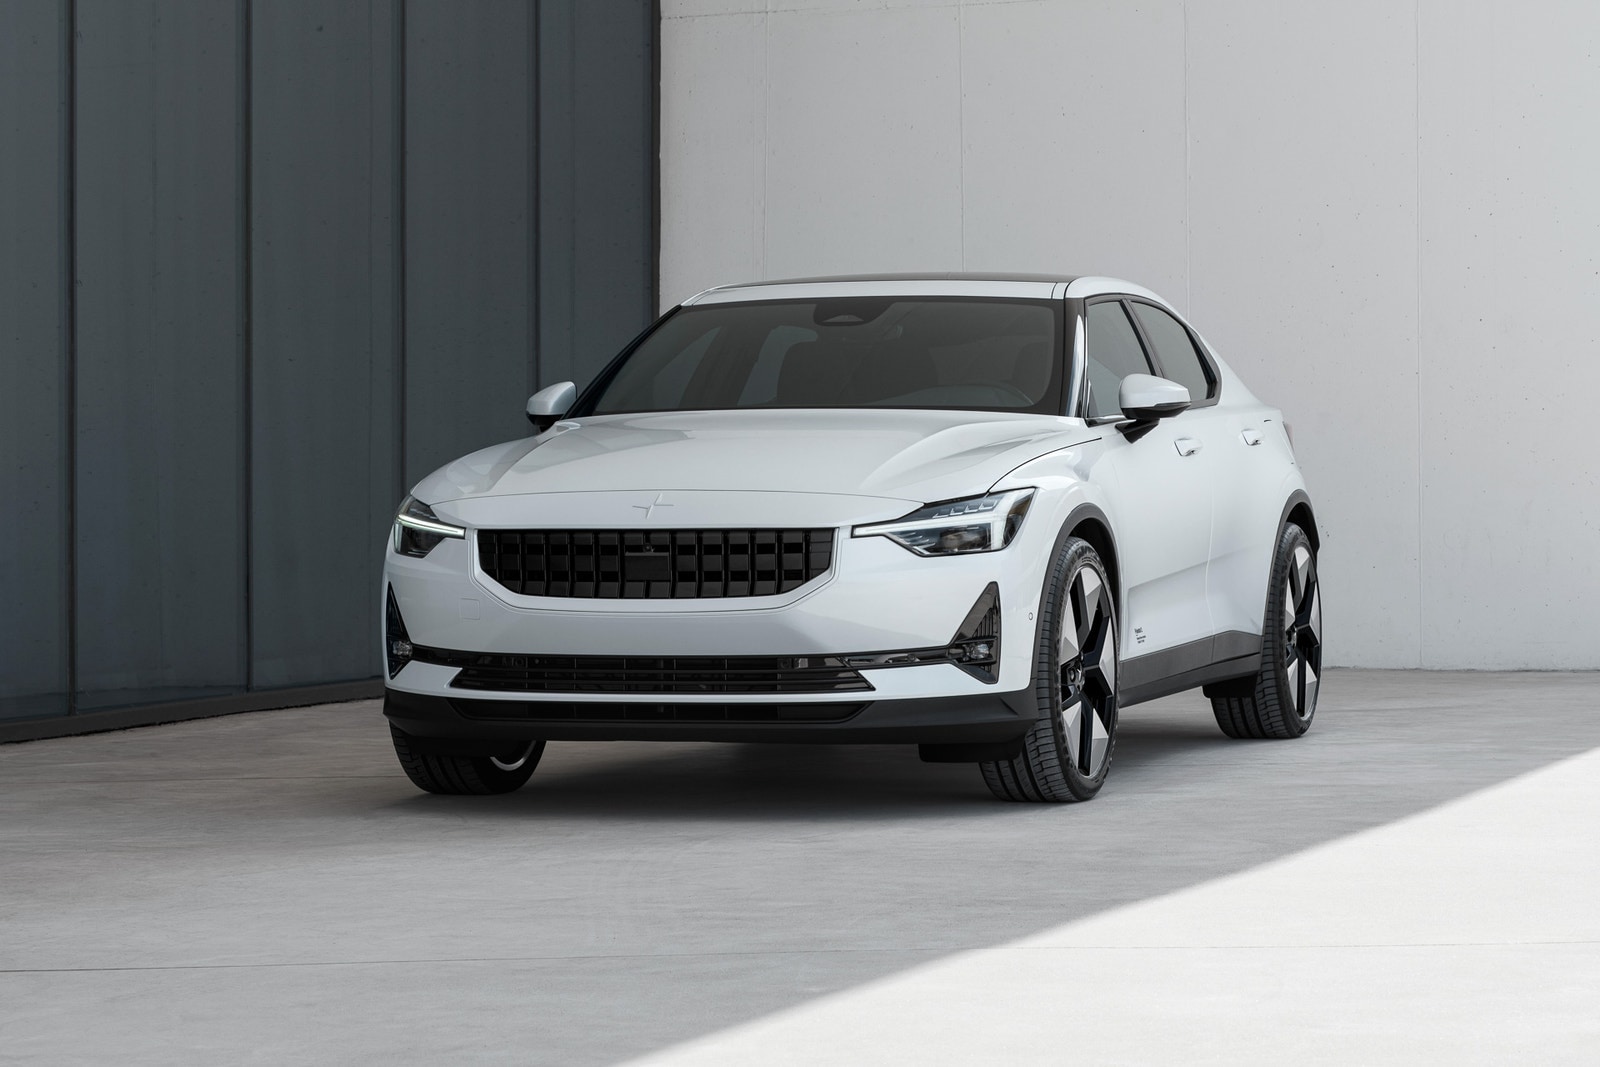 An over-the-air update gives your Polestar 2 more power